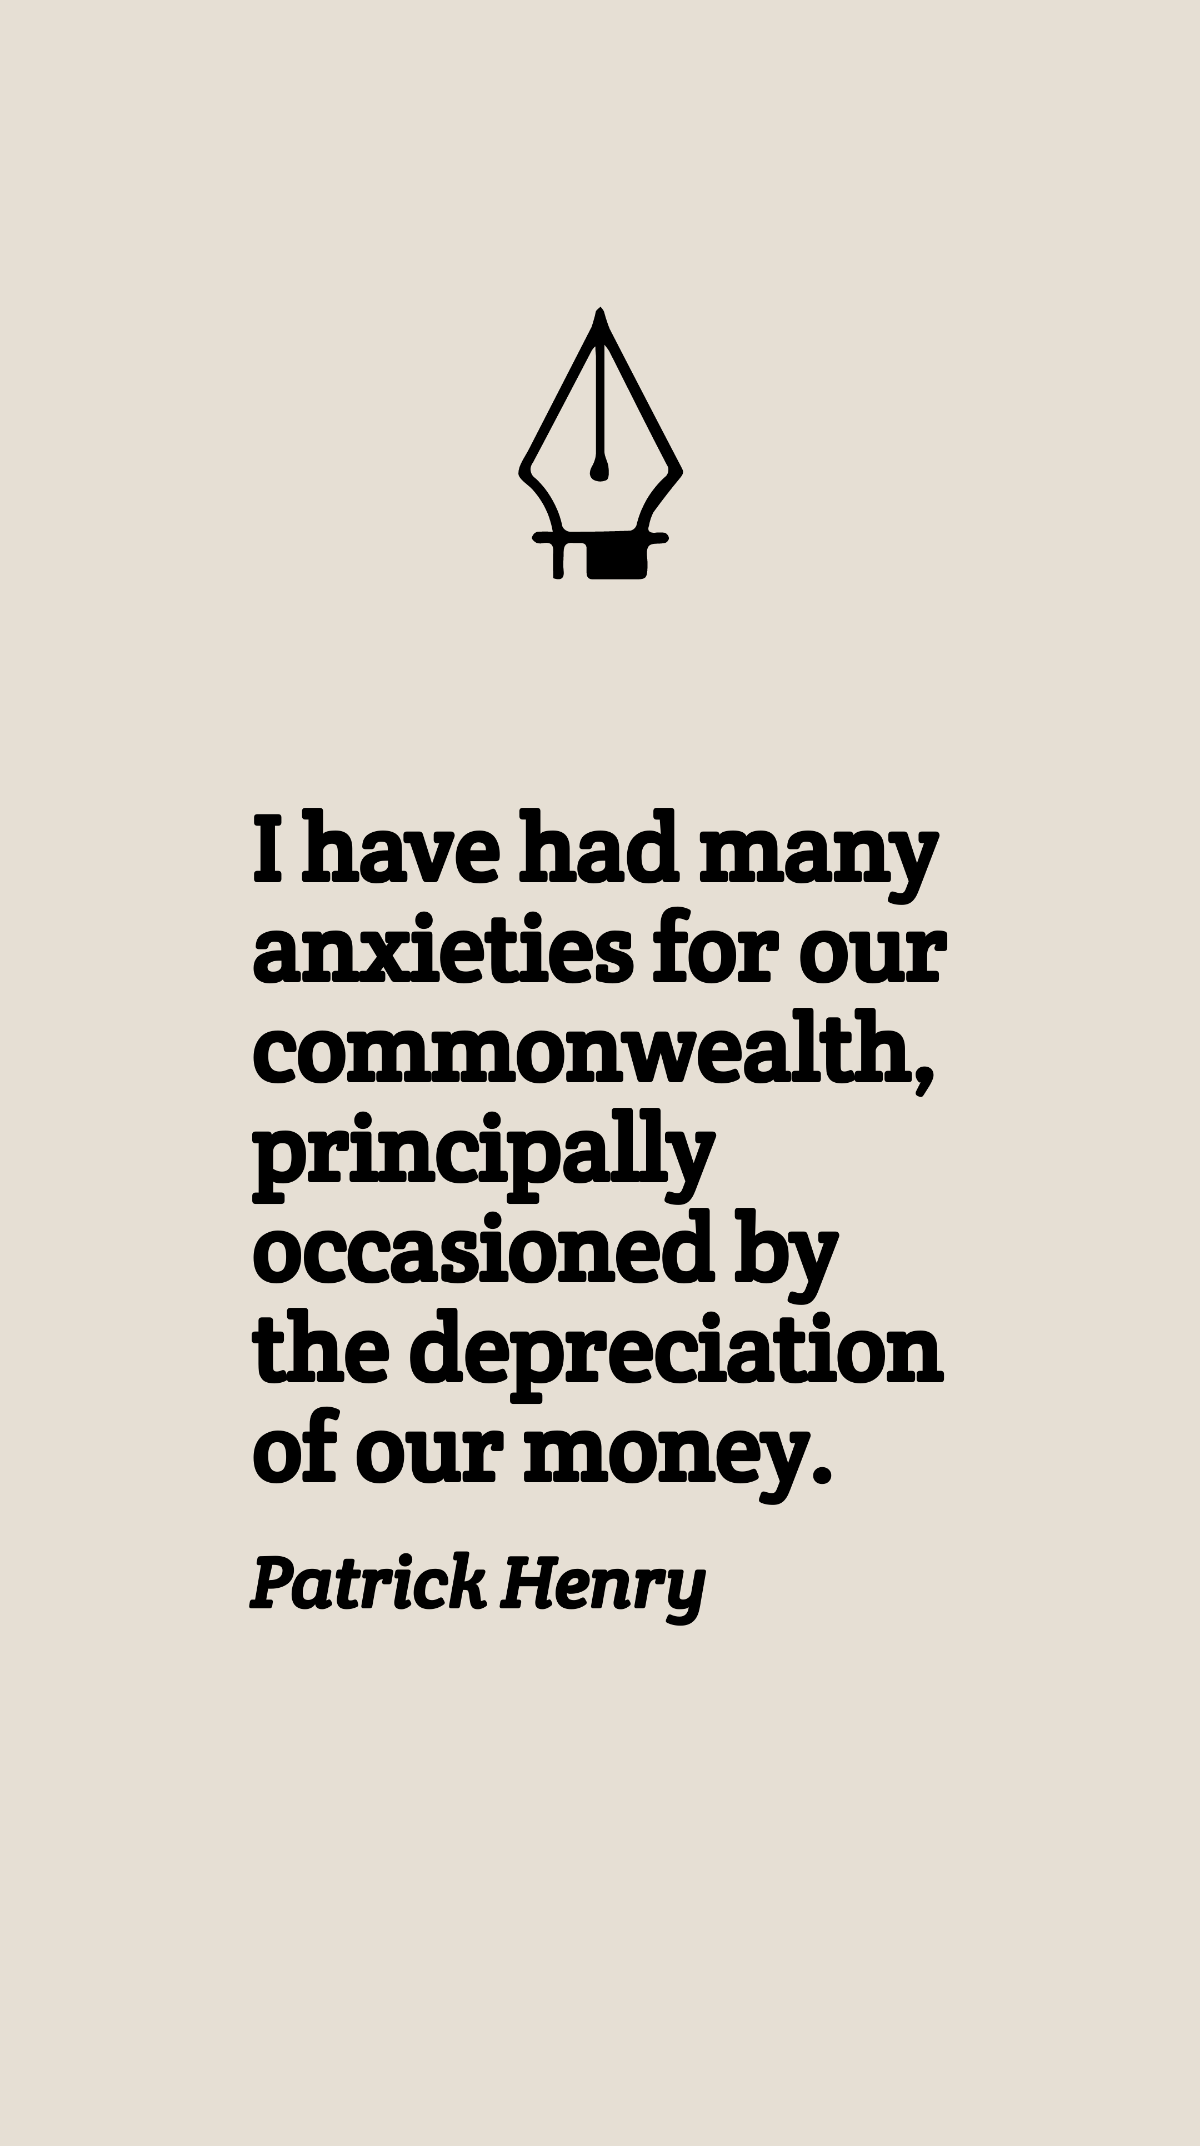 Free Patrick Henry - I have had many anxieties for our commonwealth, principally occasioned by the depreciation of our money. Template